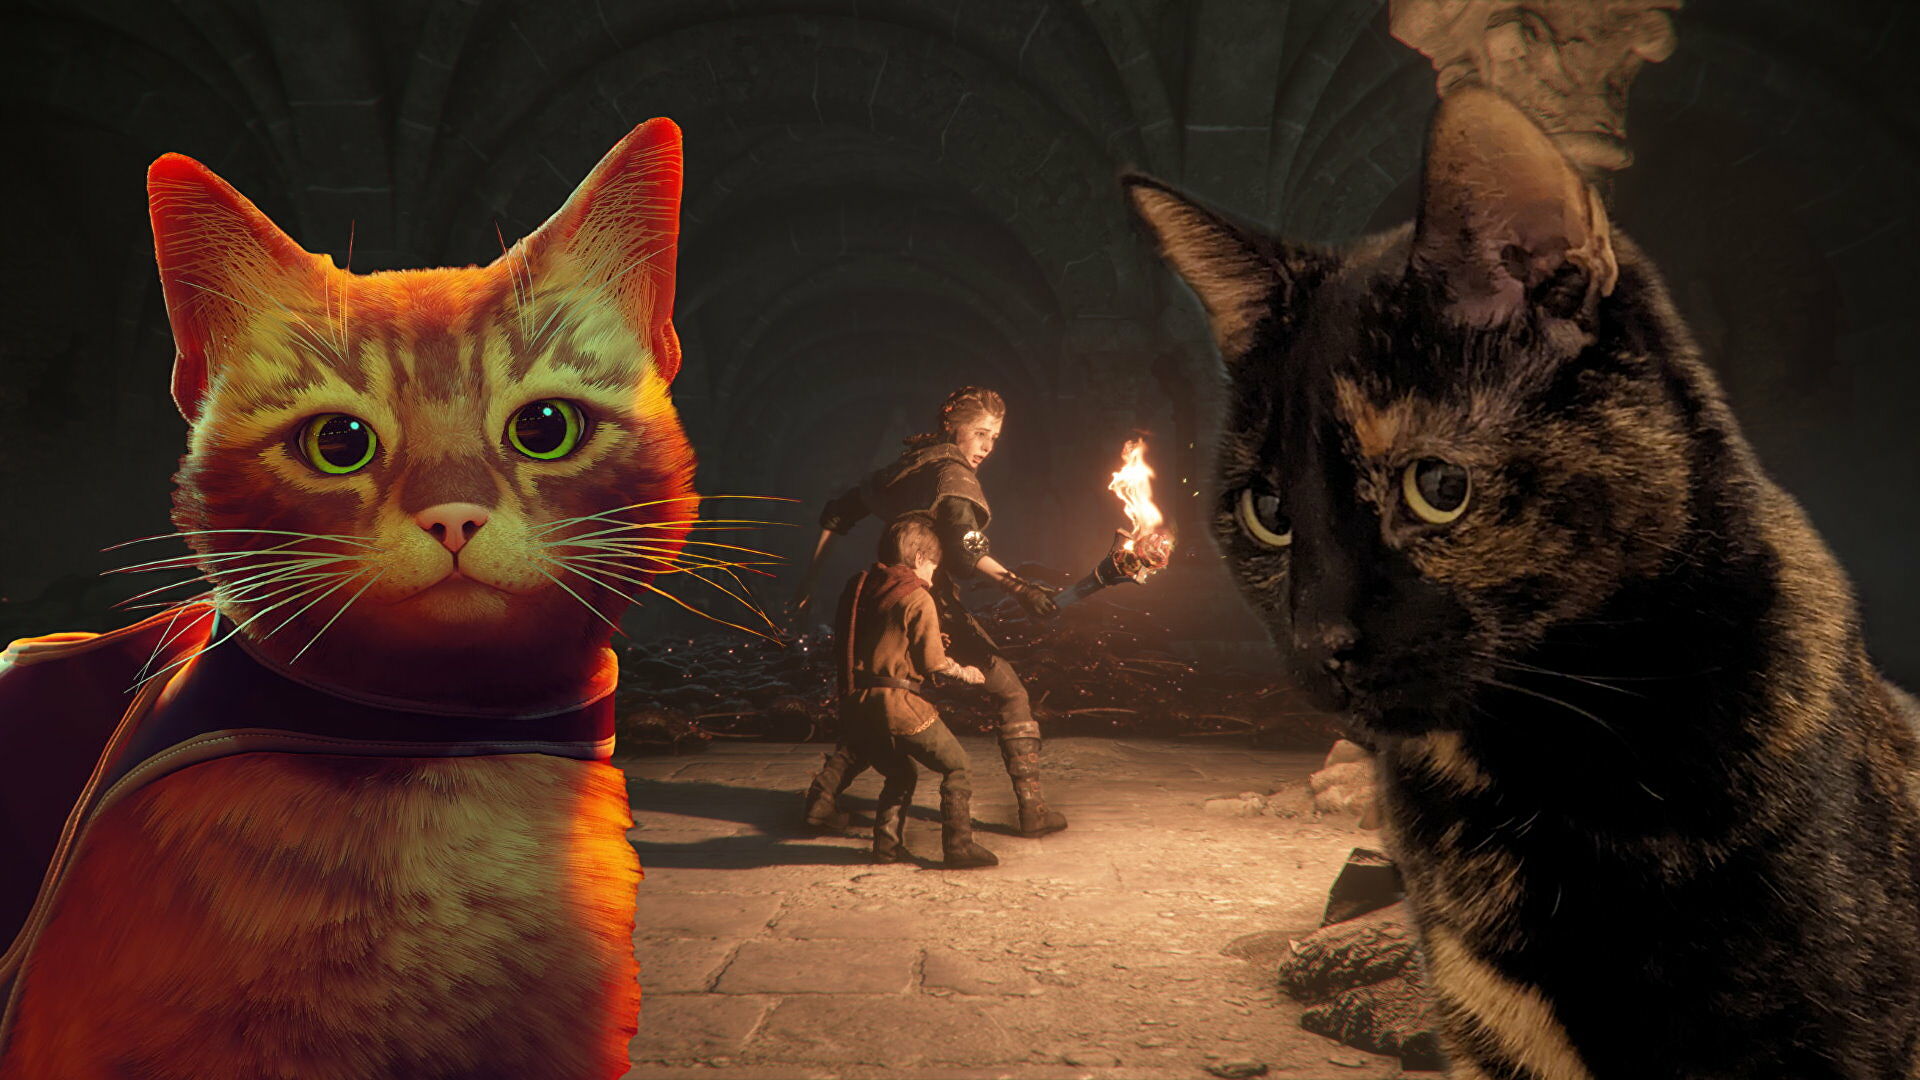 I think my cats hate video games, and I’m absolutely devastated